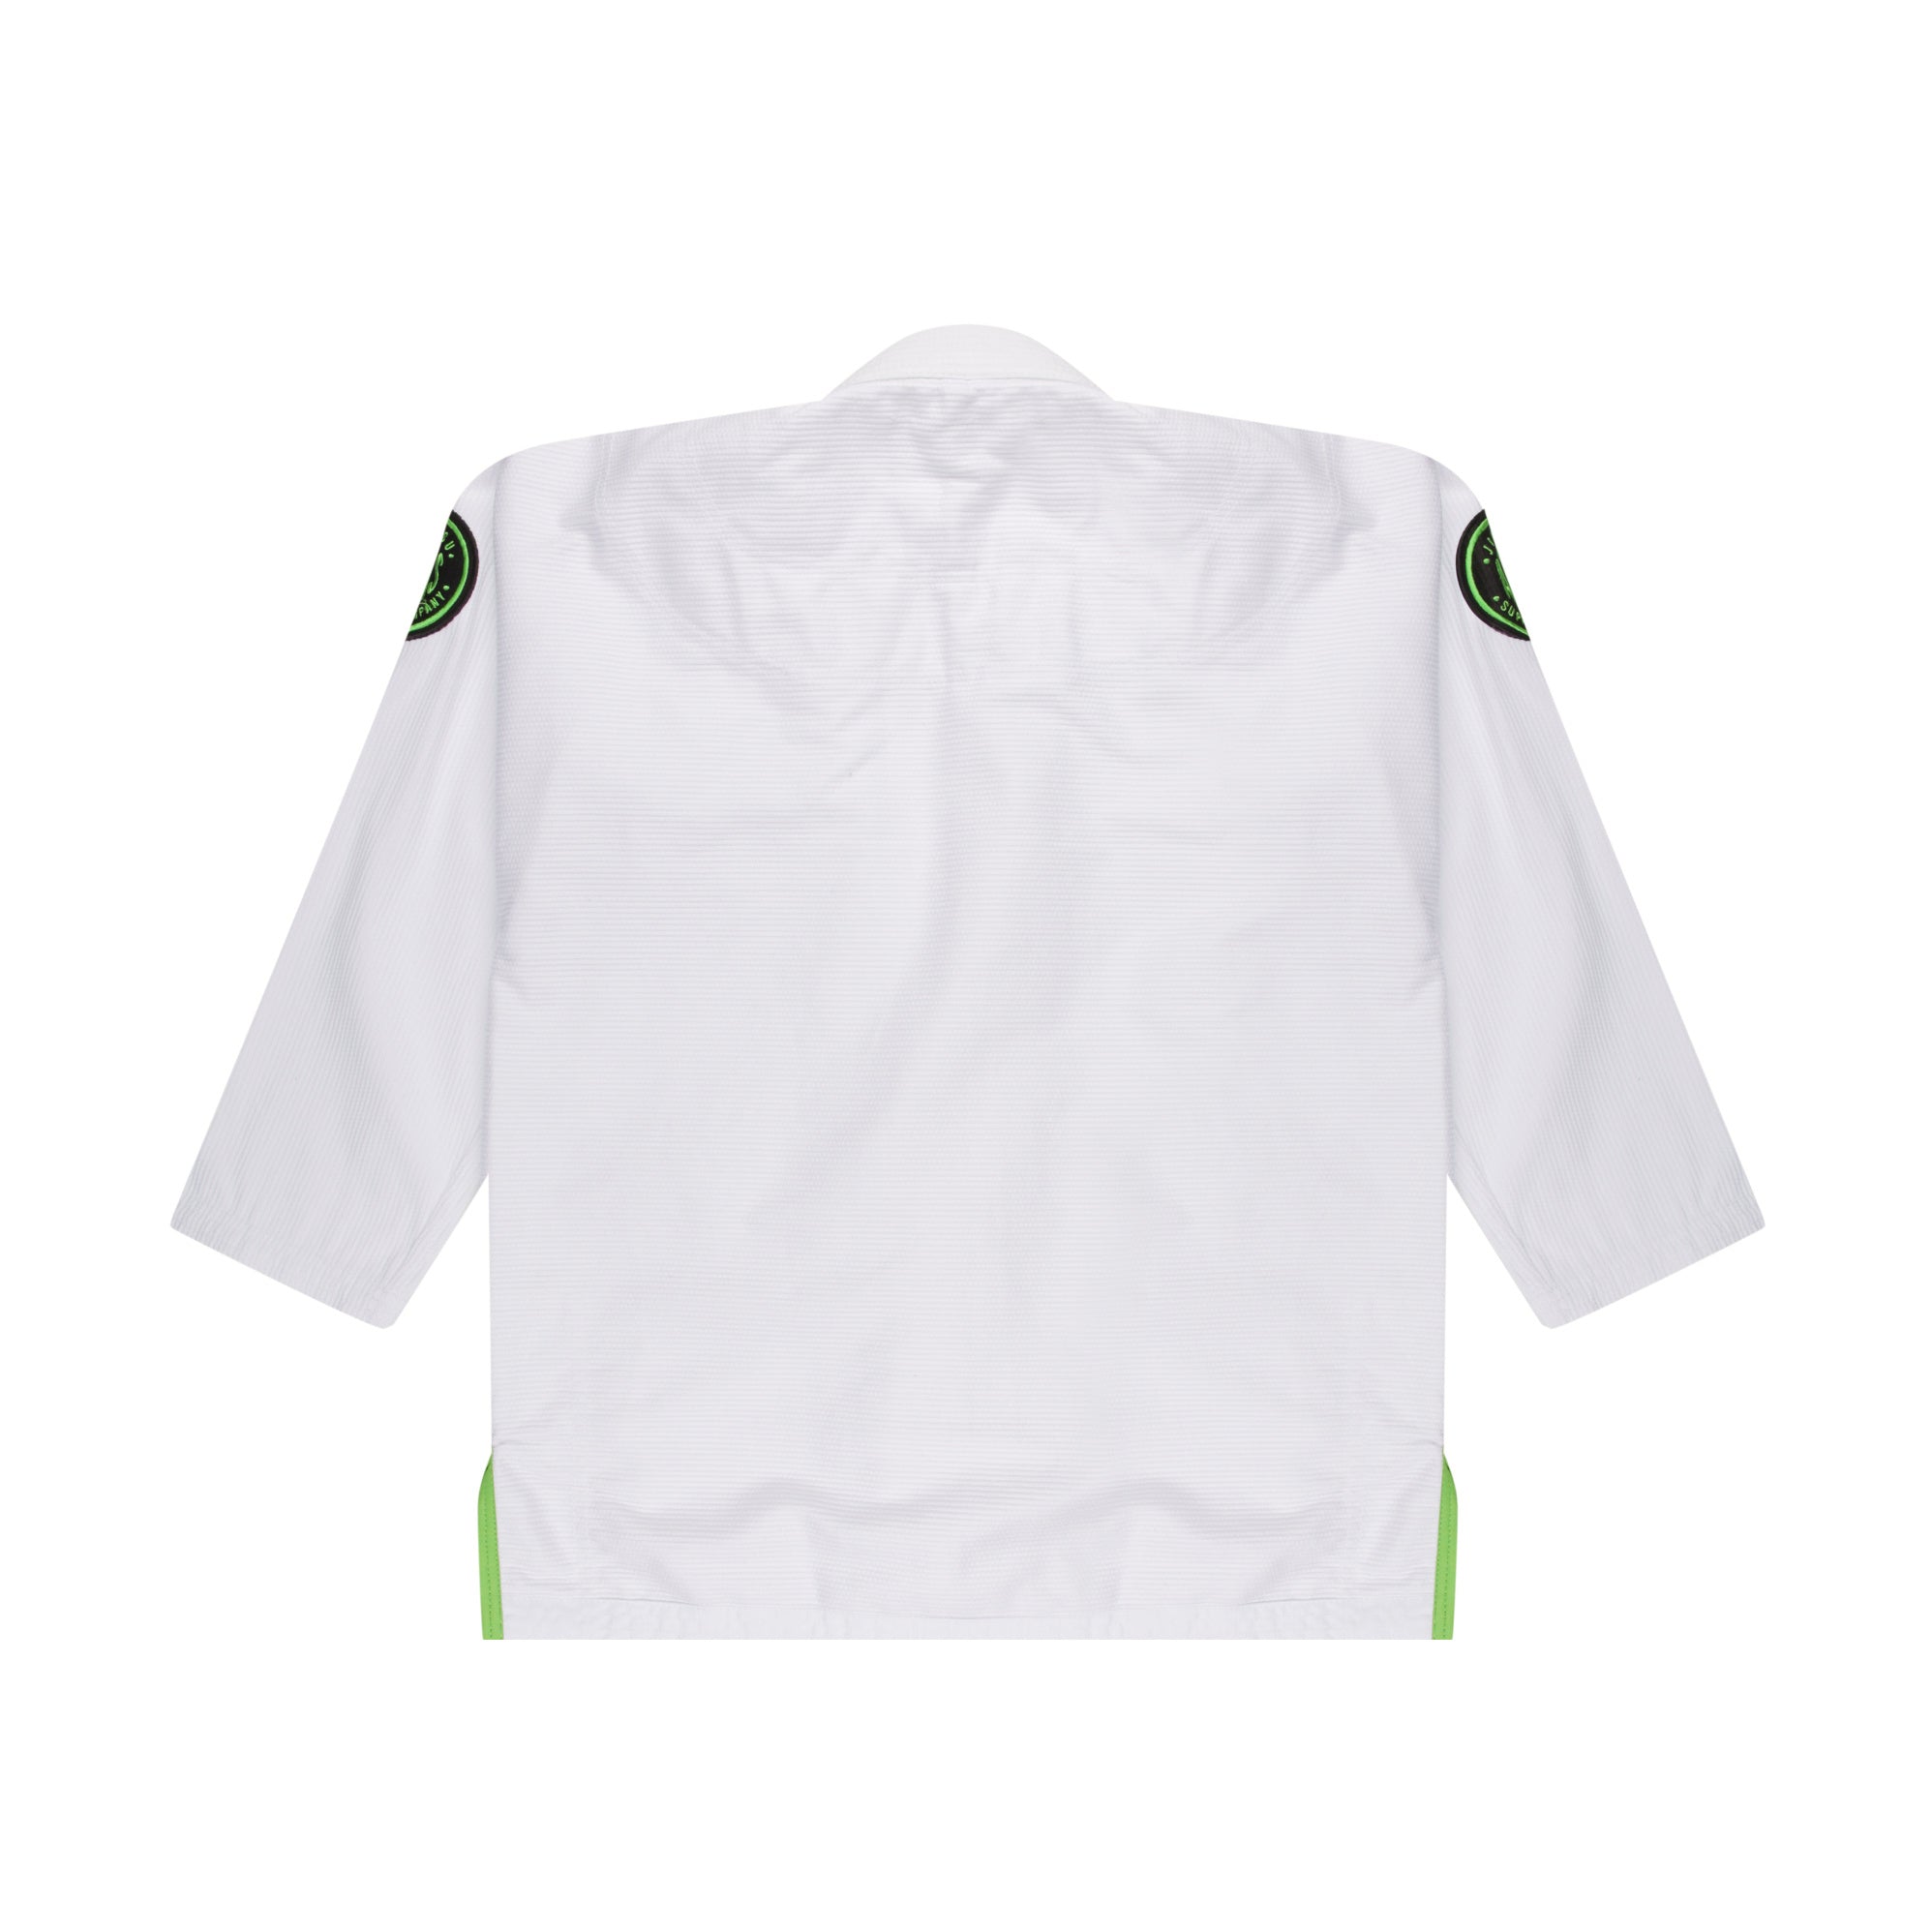 Pro Standard Competitor - White with Black/Green